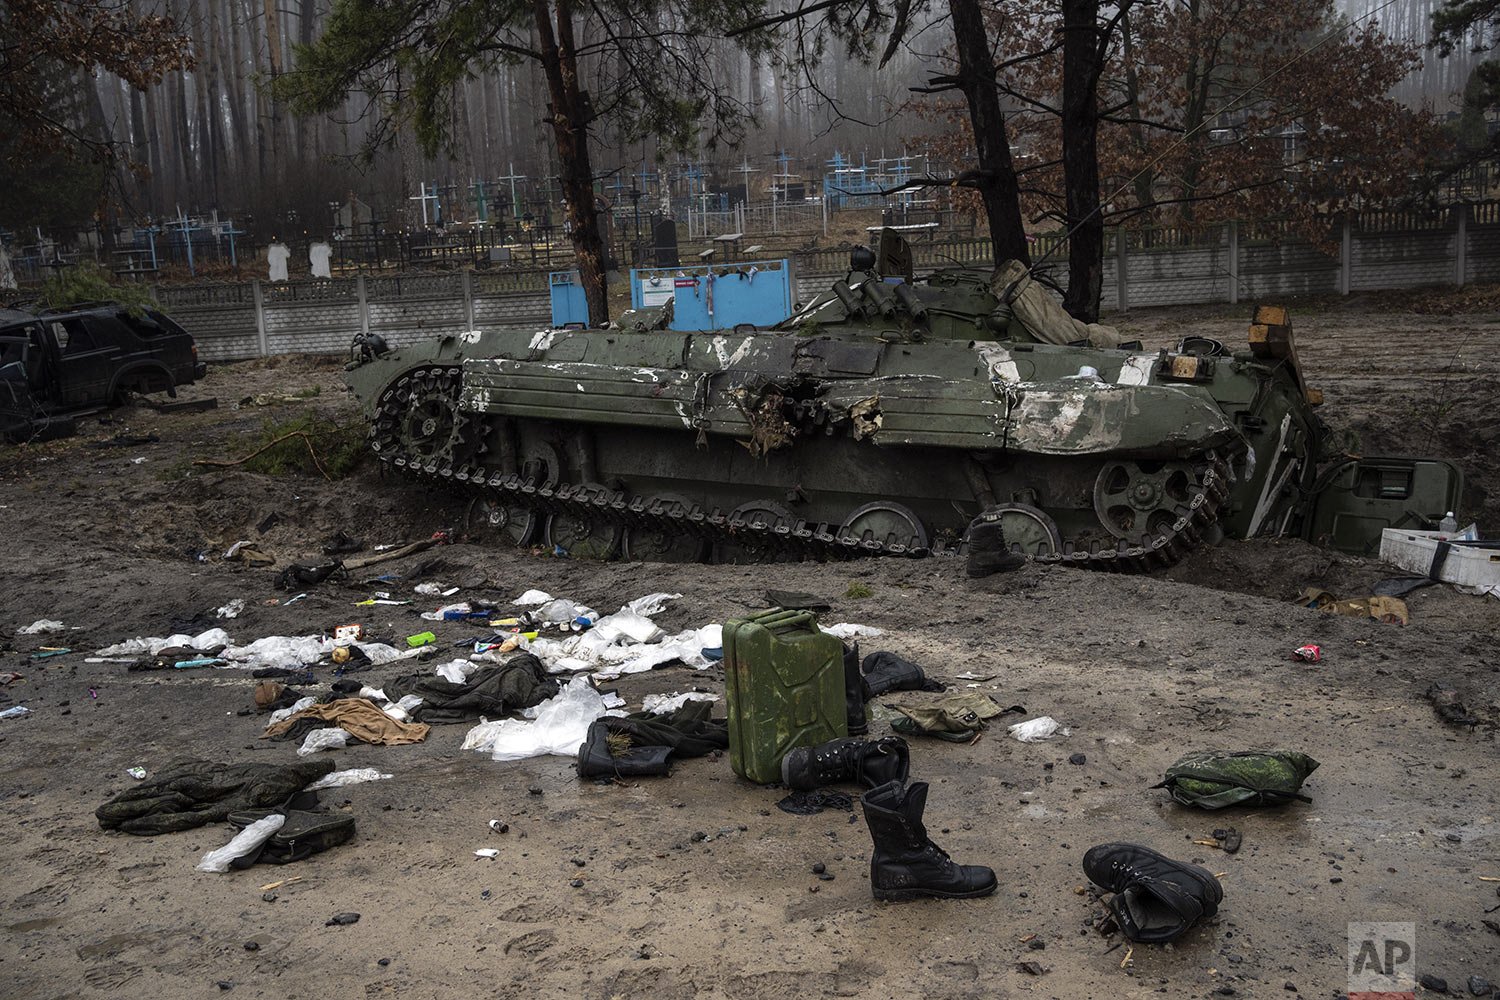  Military gear left behind by Russian soldiers lay scattered near a tank during a military sweep by Ukrainian soldiers after the Russians withdrawal from the area on the outskirts of Kyiv, Ukraine, Friday, April 1, 2022. (AP Photo/Rodrigo Abd) 